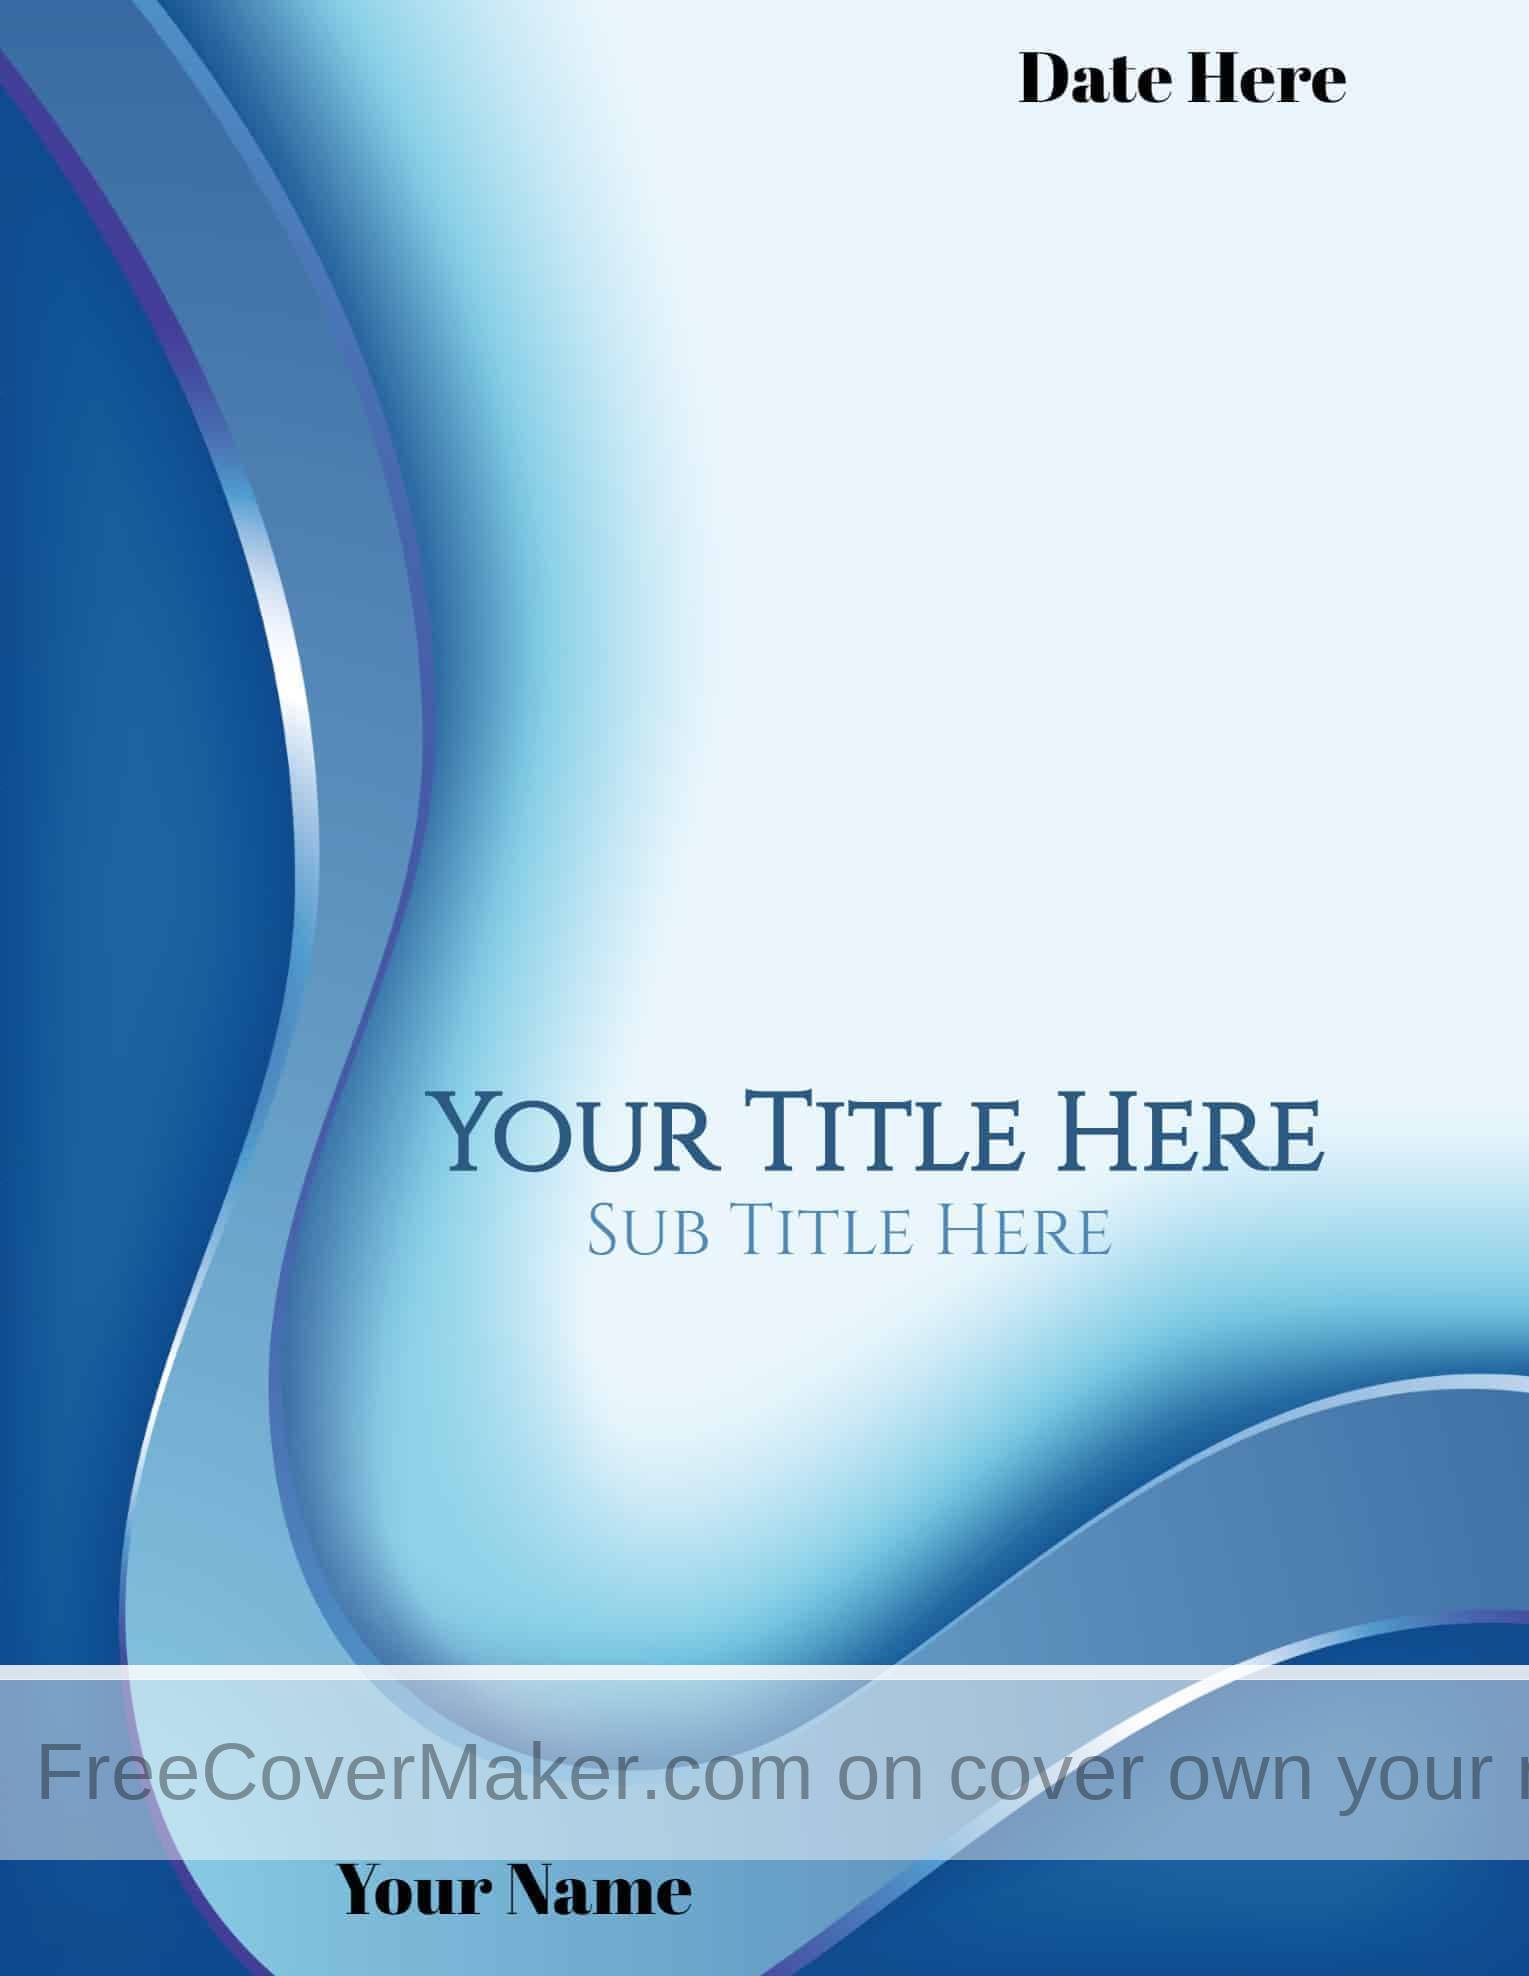 word-cover-page-design-template-free-download-best-design-idea